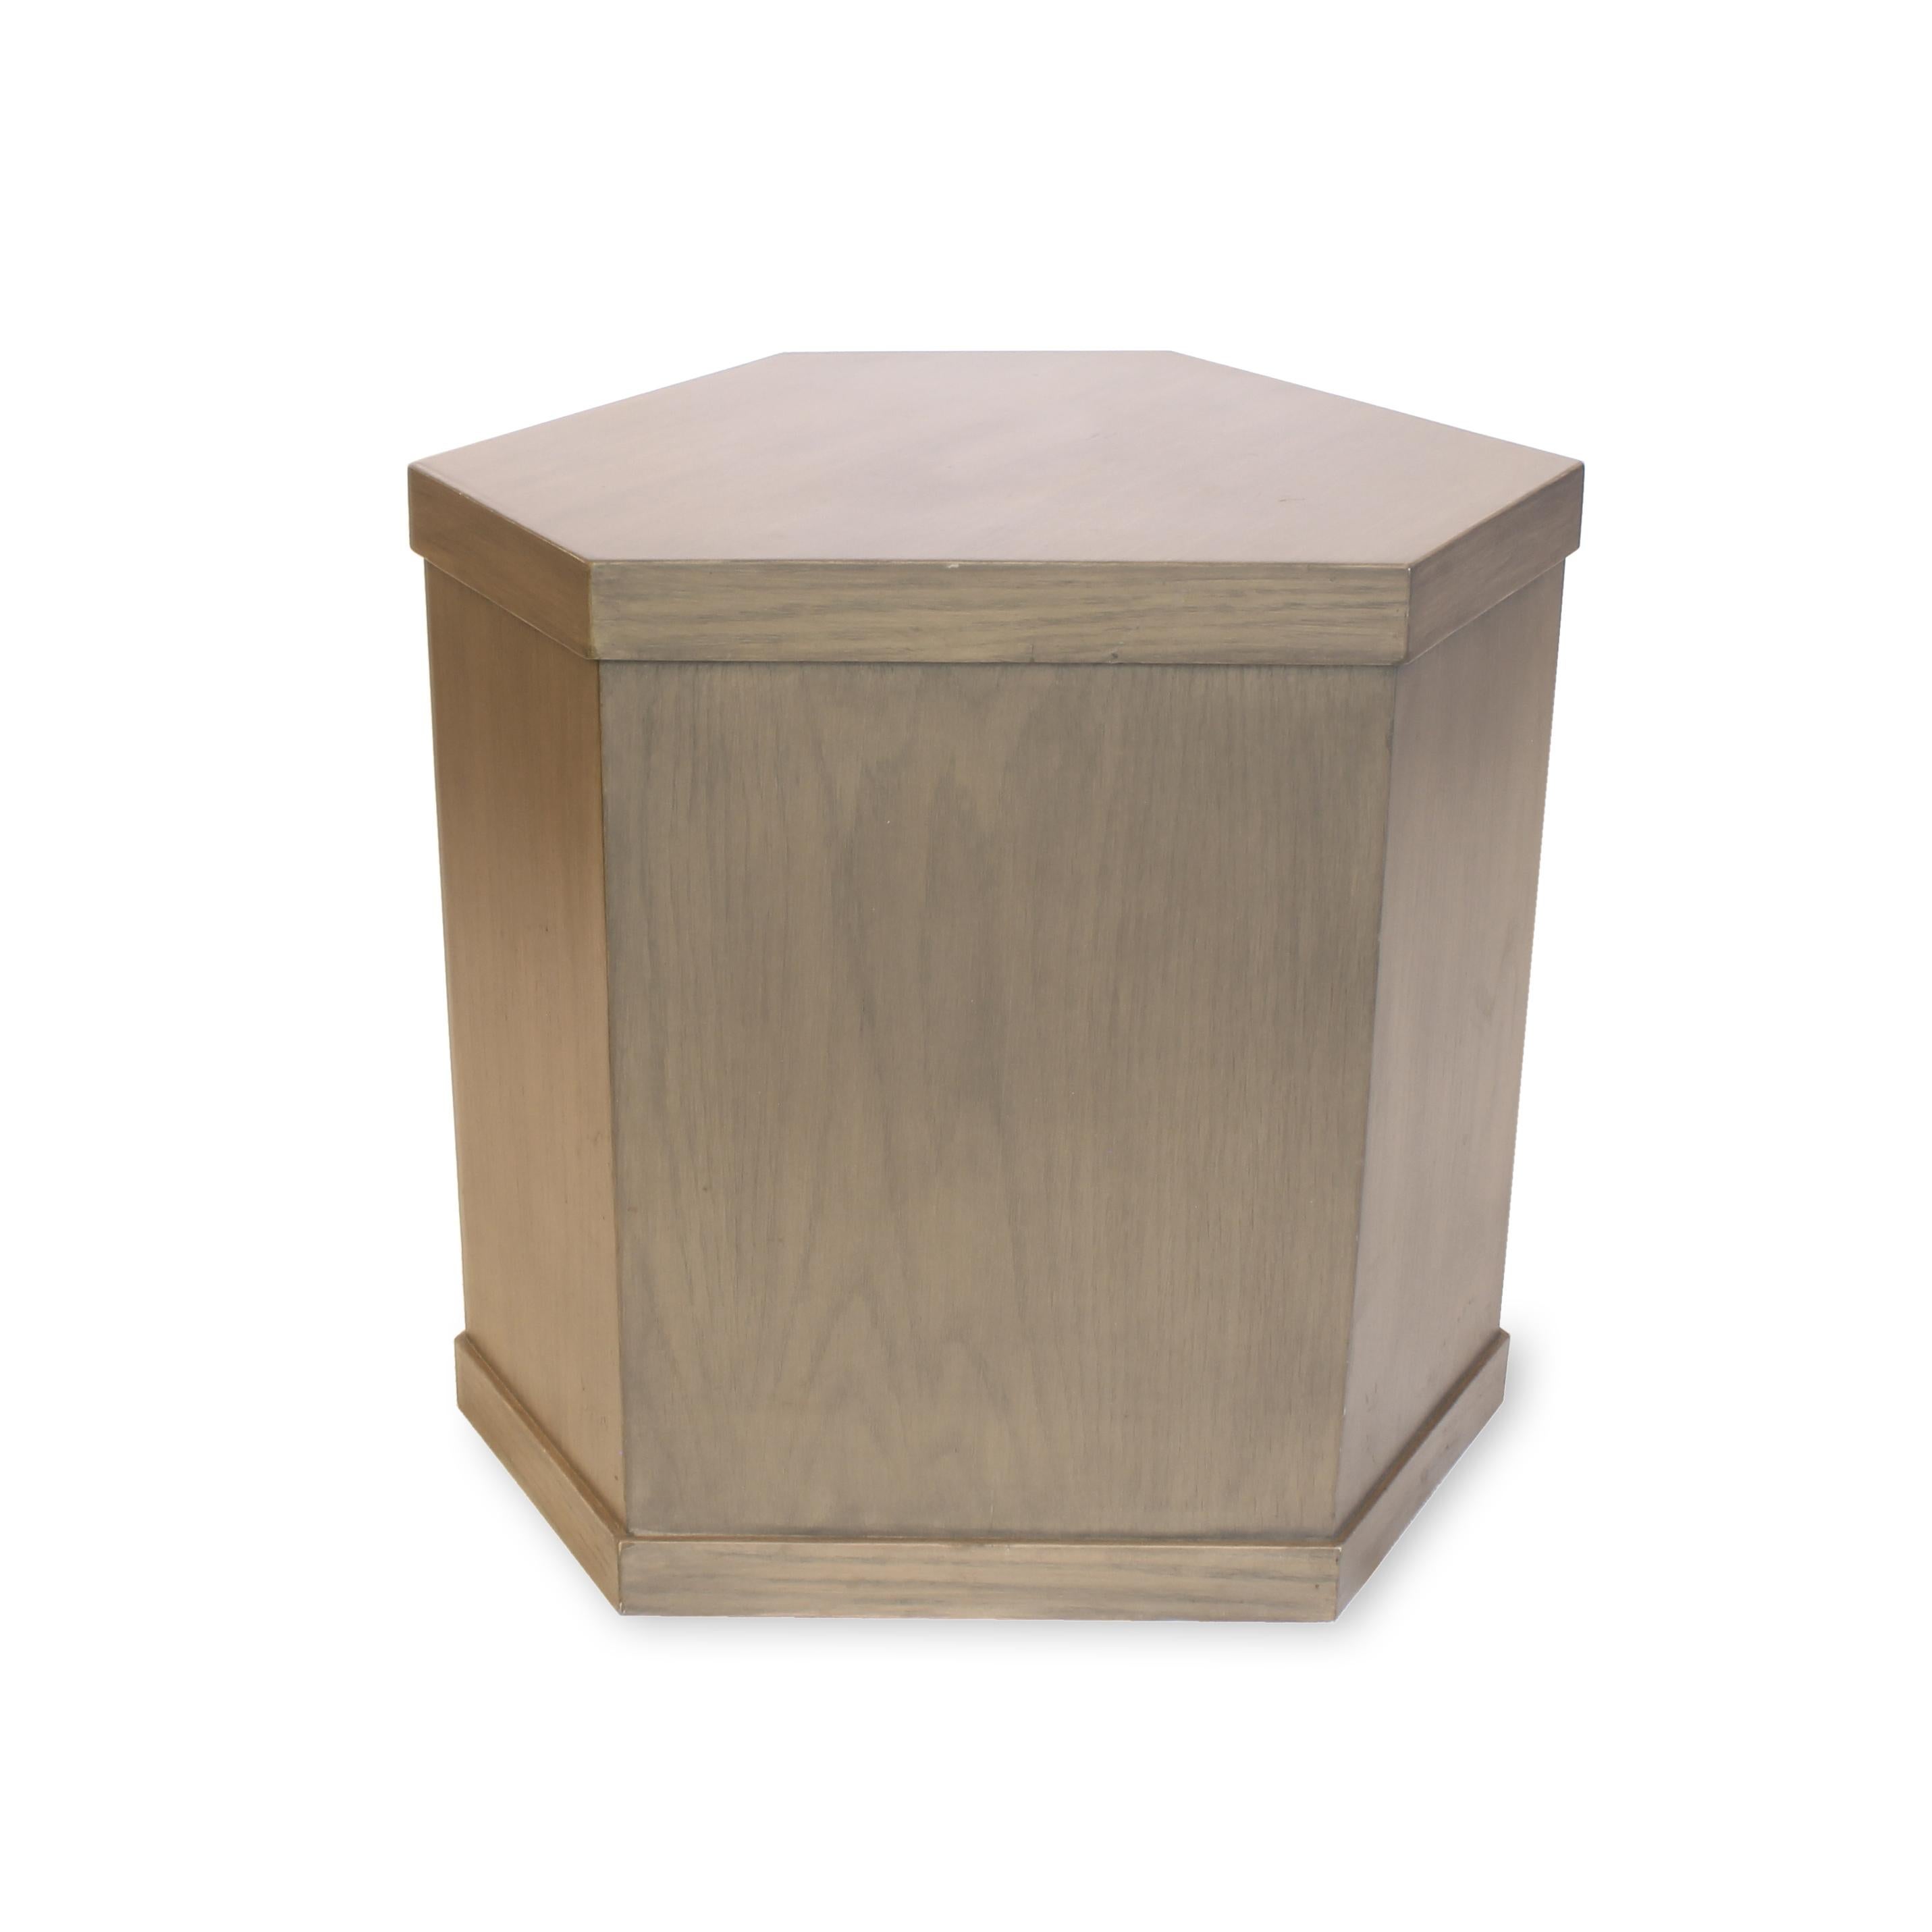 Triangular shaped side table that can double as a stool. The Putnam table frame is constructed from maple wood applied with oak wood veneer. Four standard finishes available.

Dimensions: 17